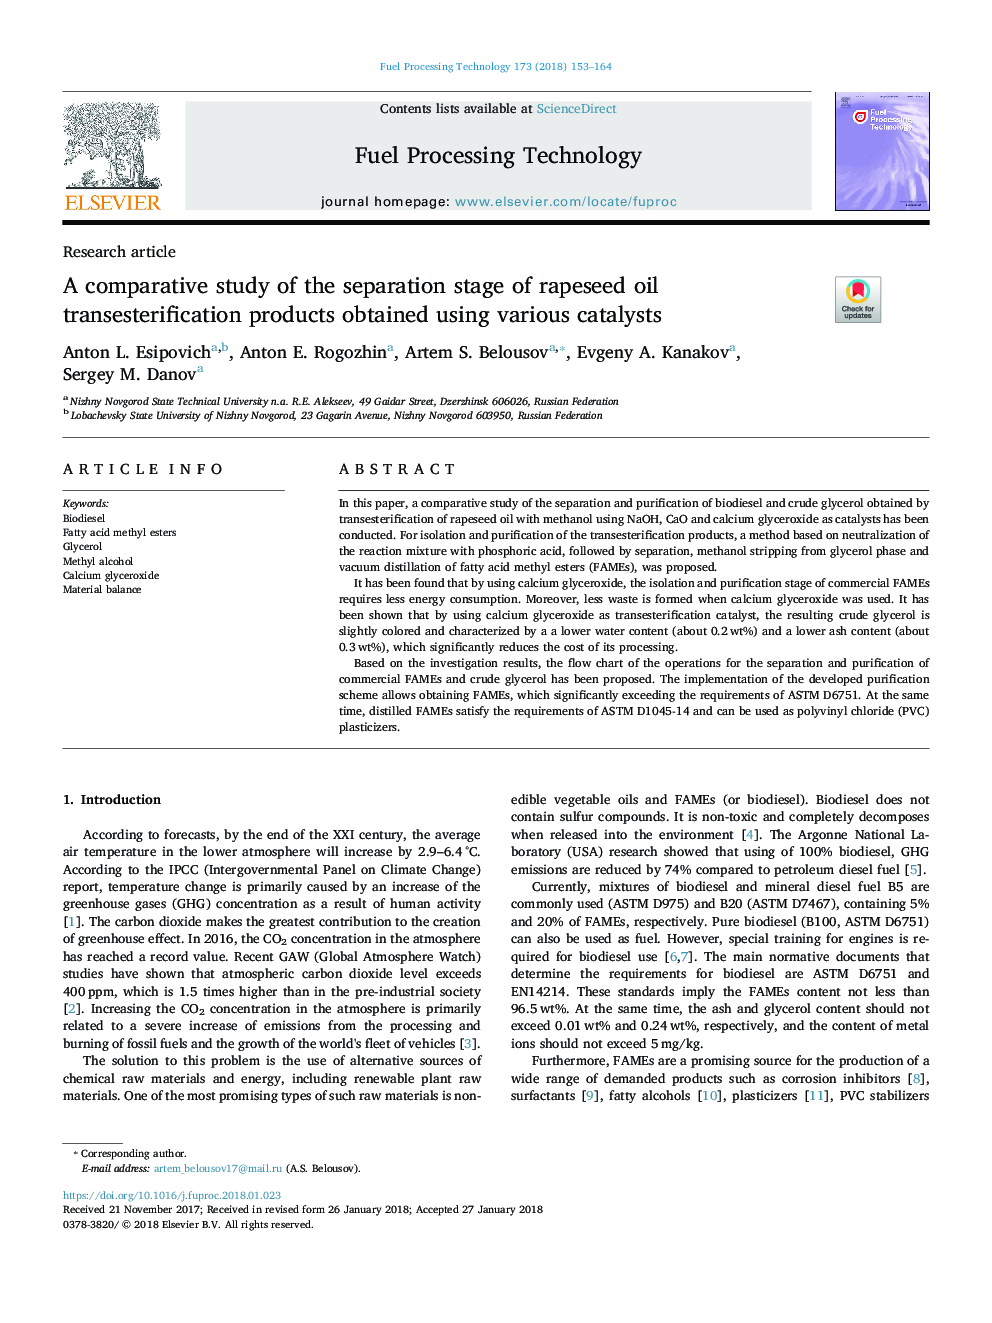 A comparative study of the separation stage of rapeseed oil transesterification products obtained using various catalysts